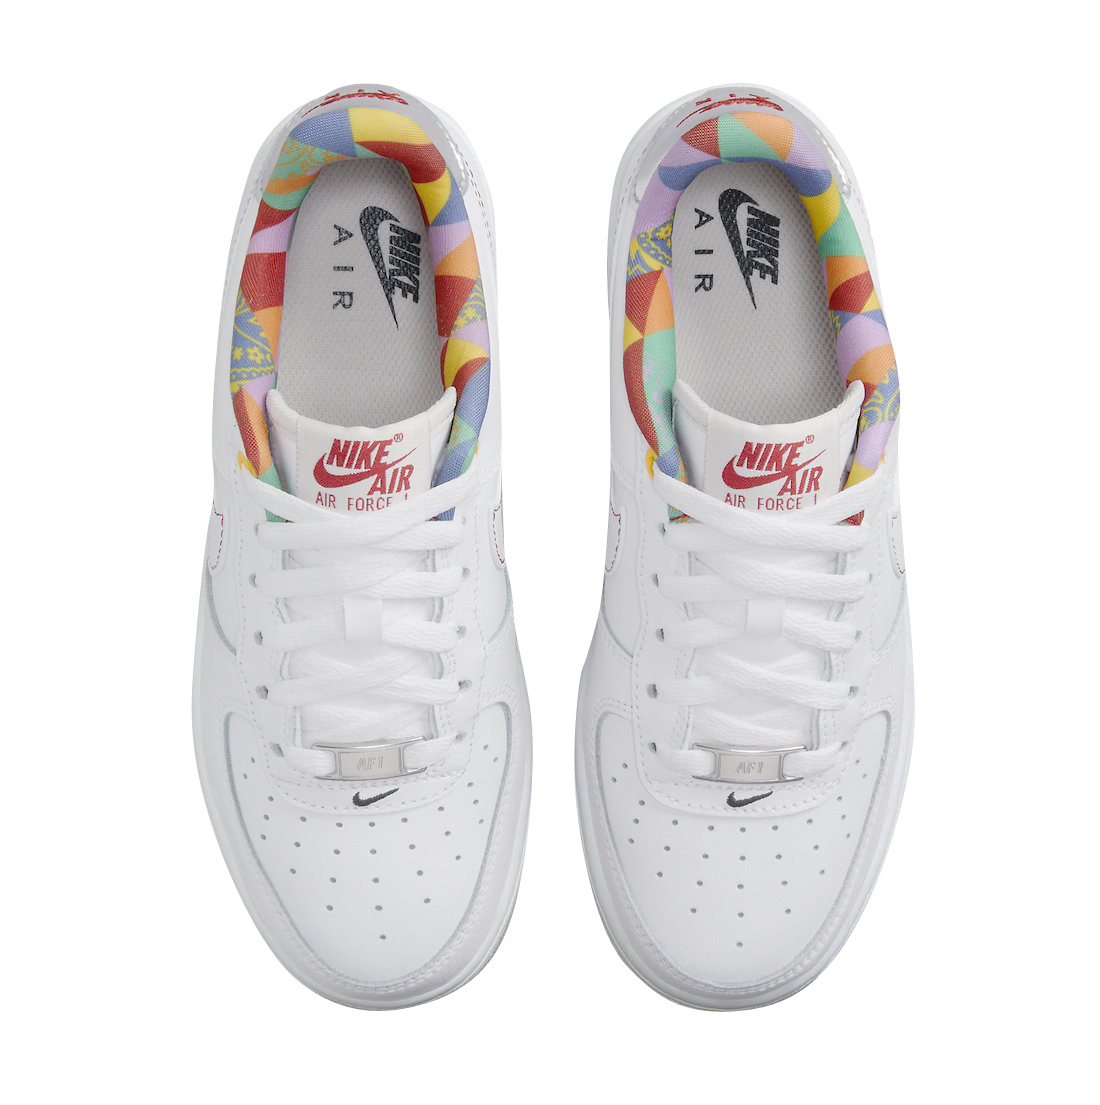 Nike Air Force 1 Low LV8 White Playful Print (GS)